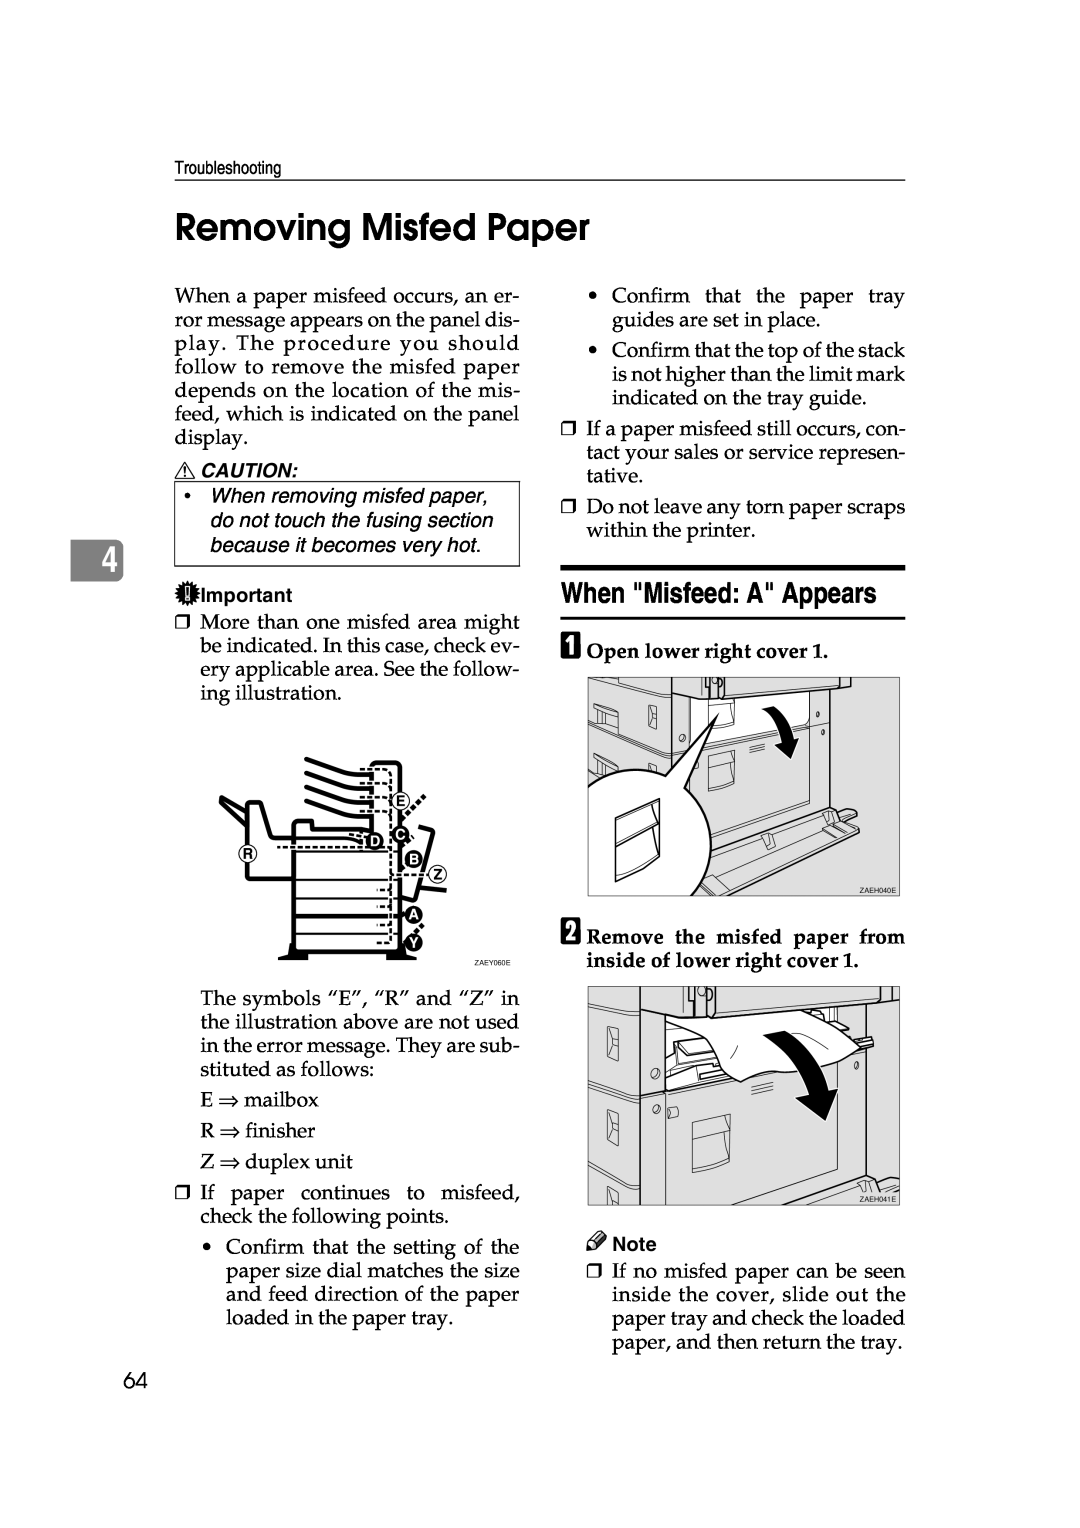 Lanier AP3200 manual Removing Misfed Paper, When Misfeed: A Appears 